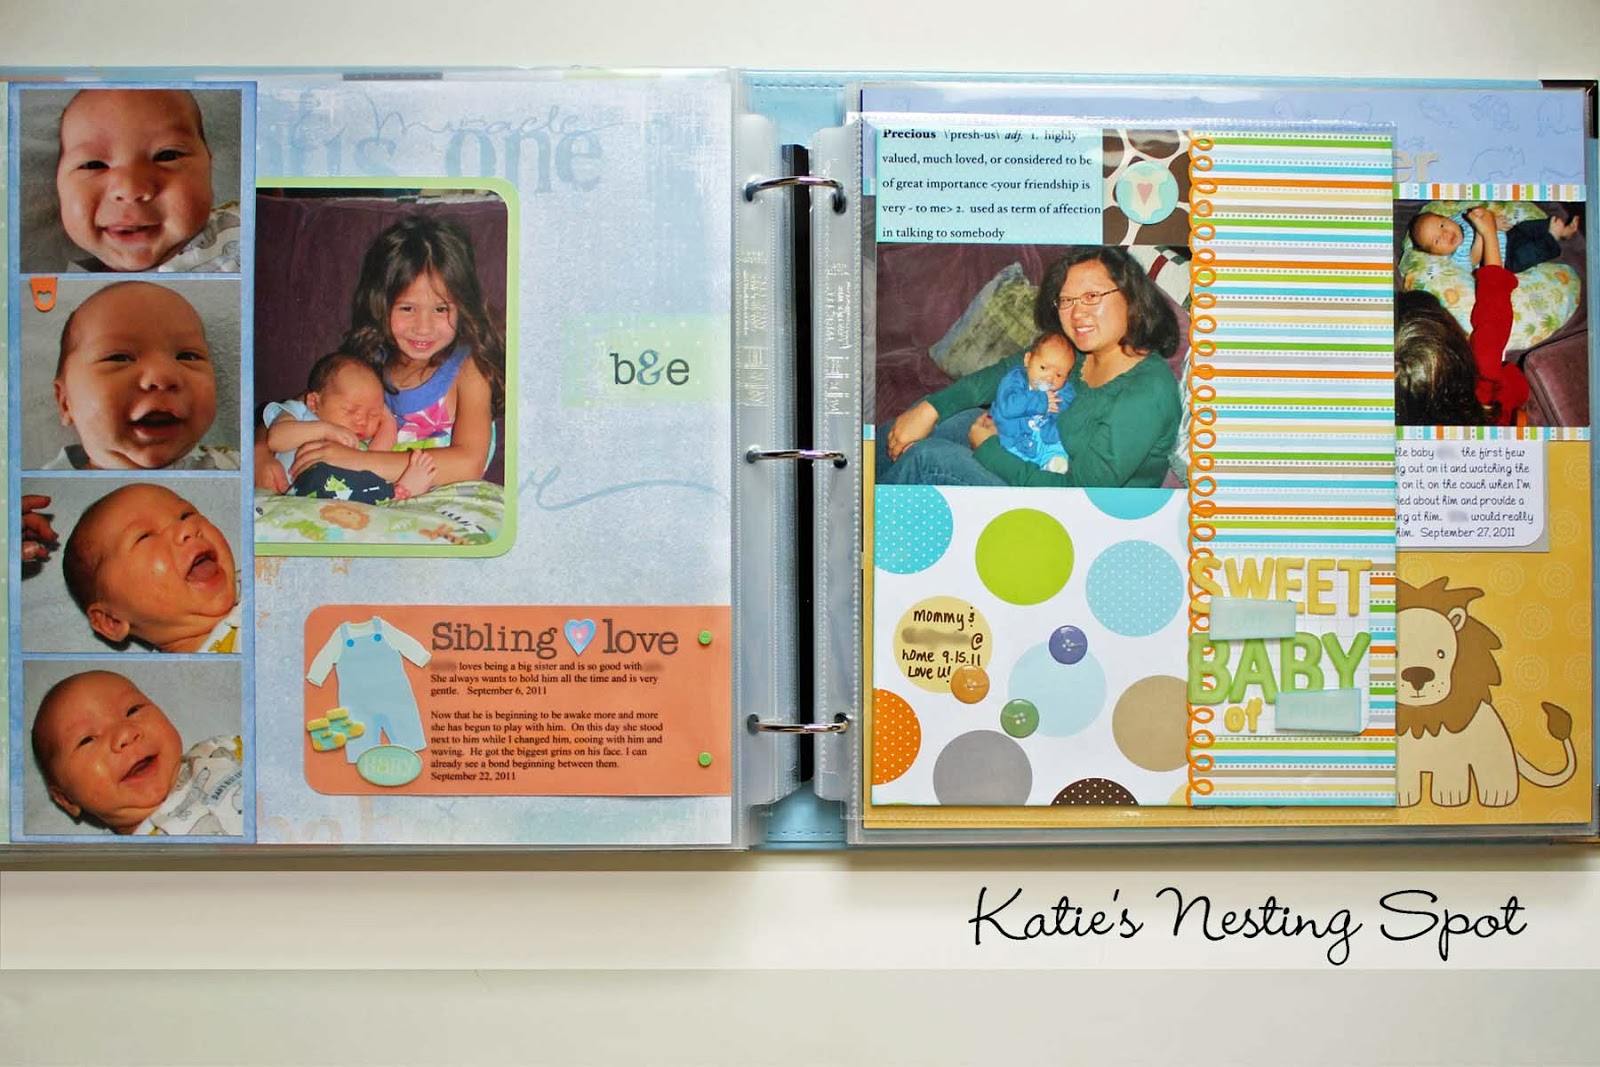 Katie's Nesting Spot: Baby Boy Scrapbook Pages: Mixing Page Sizes